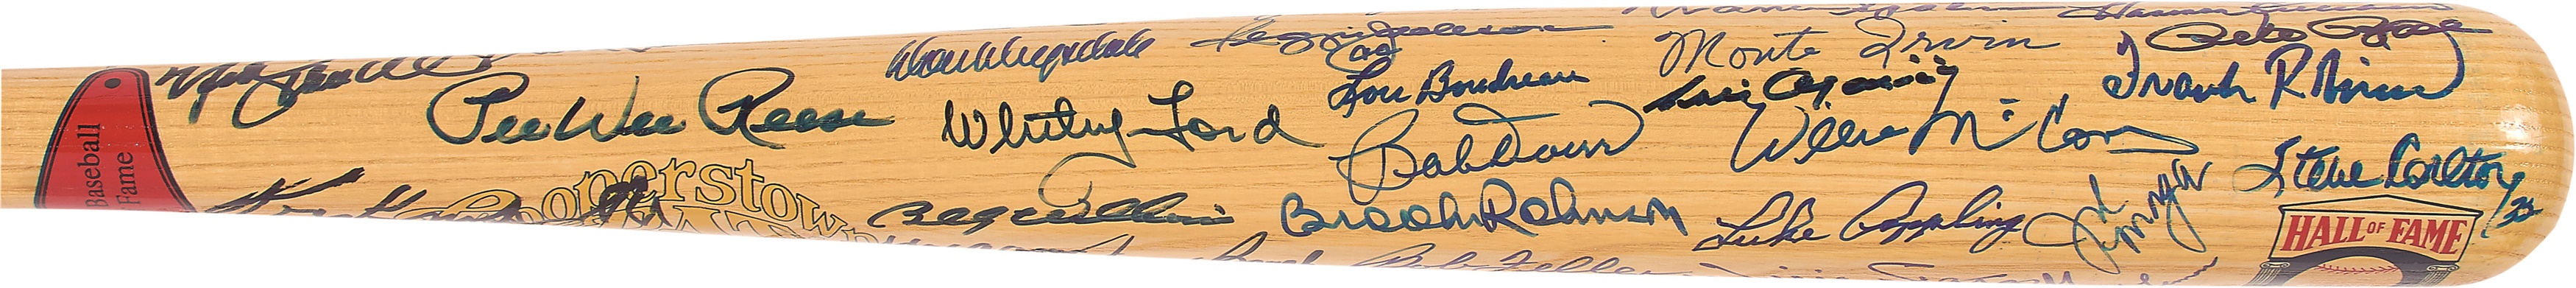 - Loaded Hall of Fame Signed Cooperstown Bat with Roy Campanella - 50+ Signatures